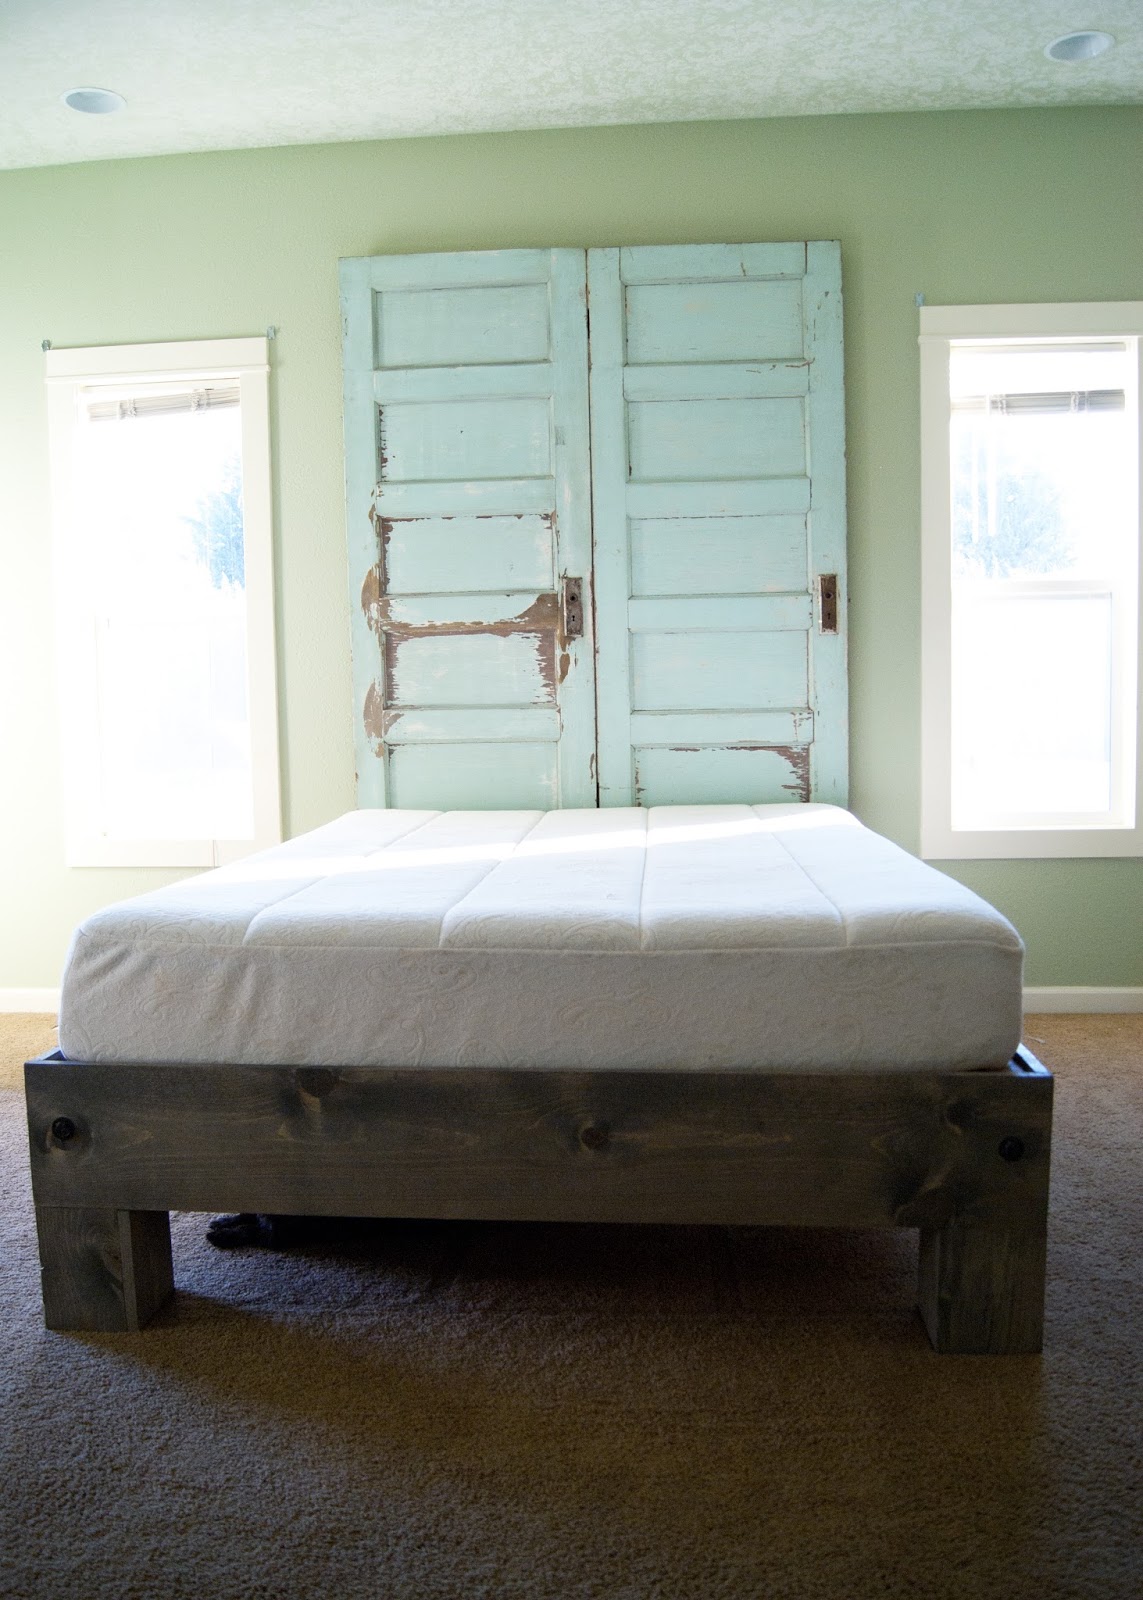 Platform bed and Old door headboard in mint green and weathered gray stain